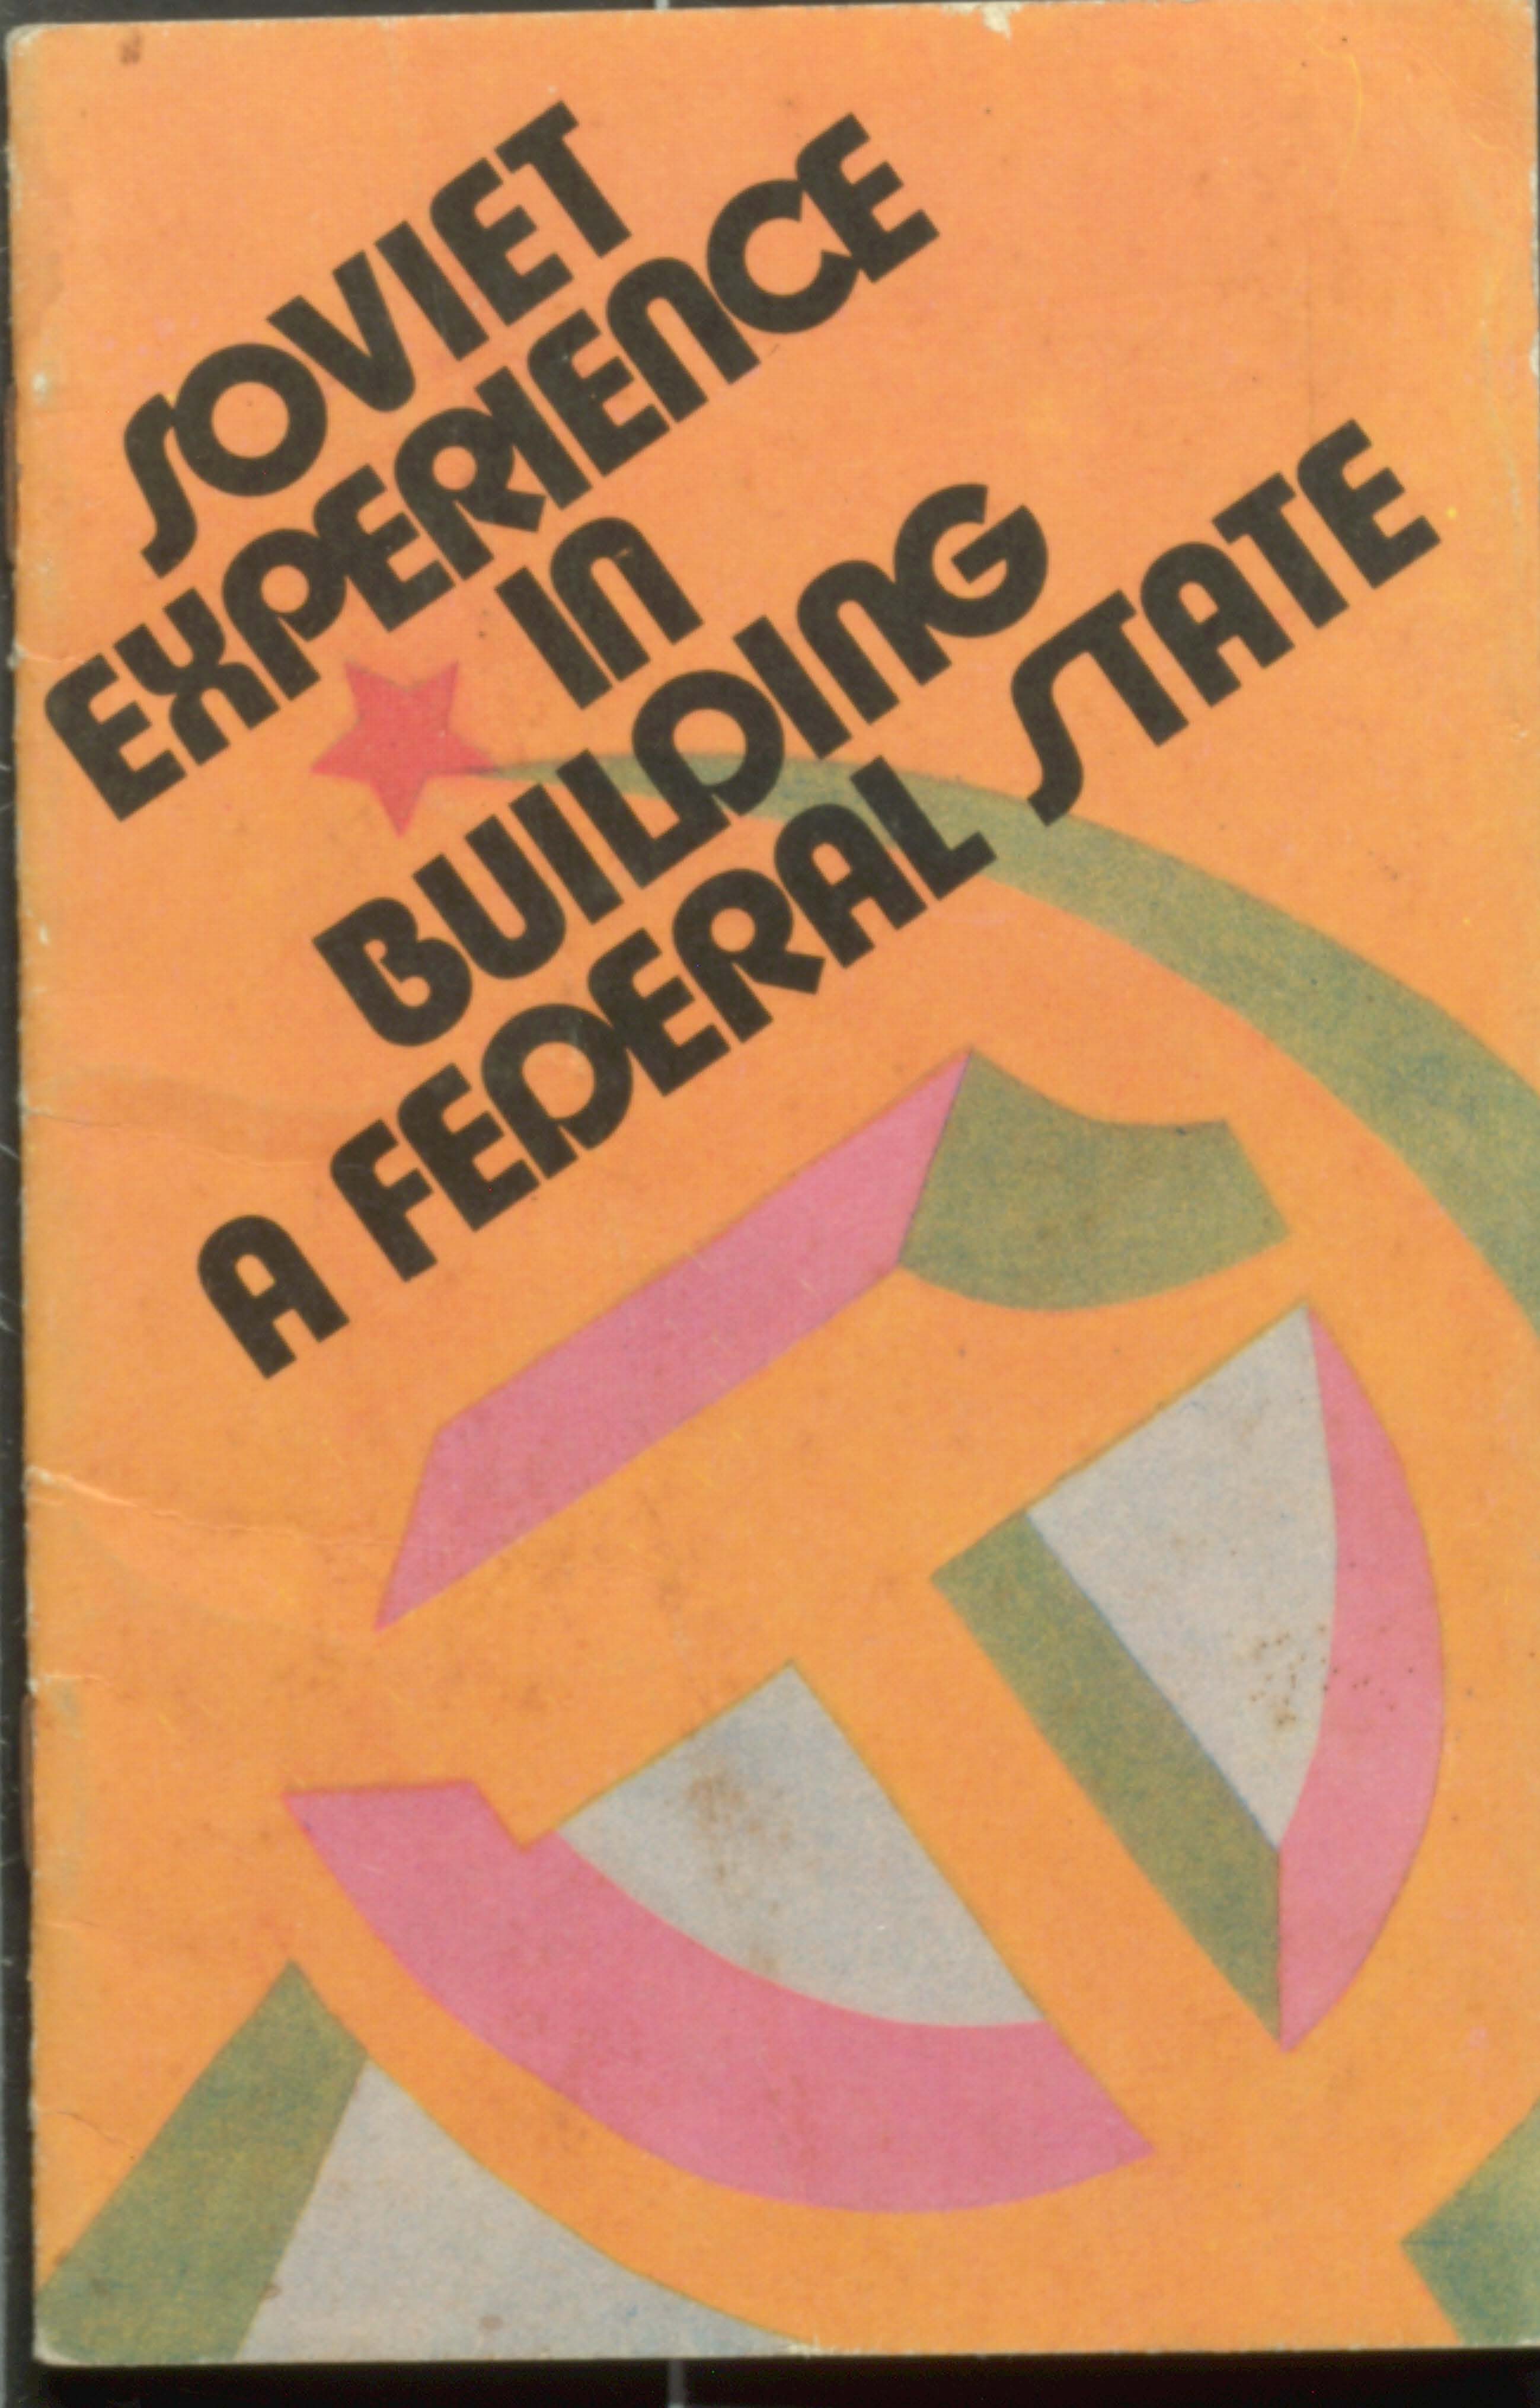 Soviet experience in builiding a federal state